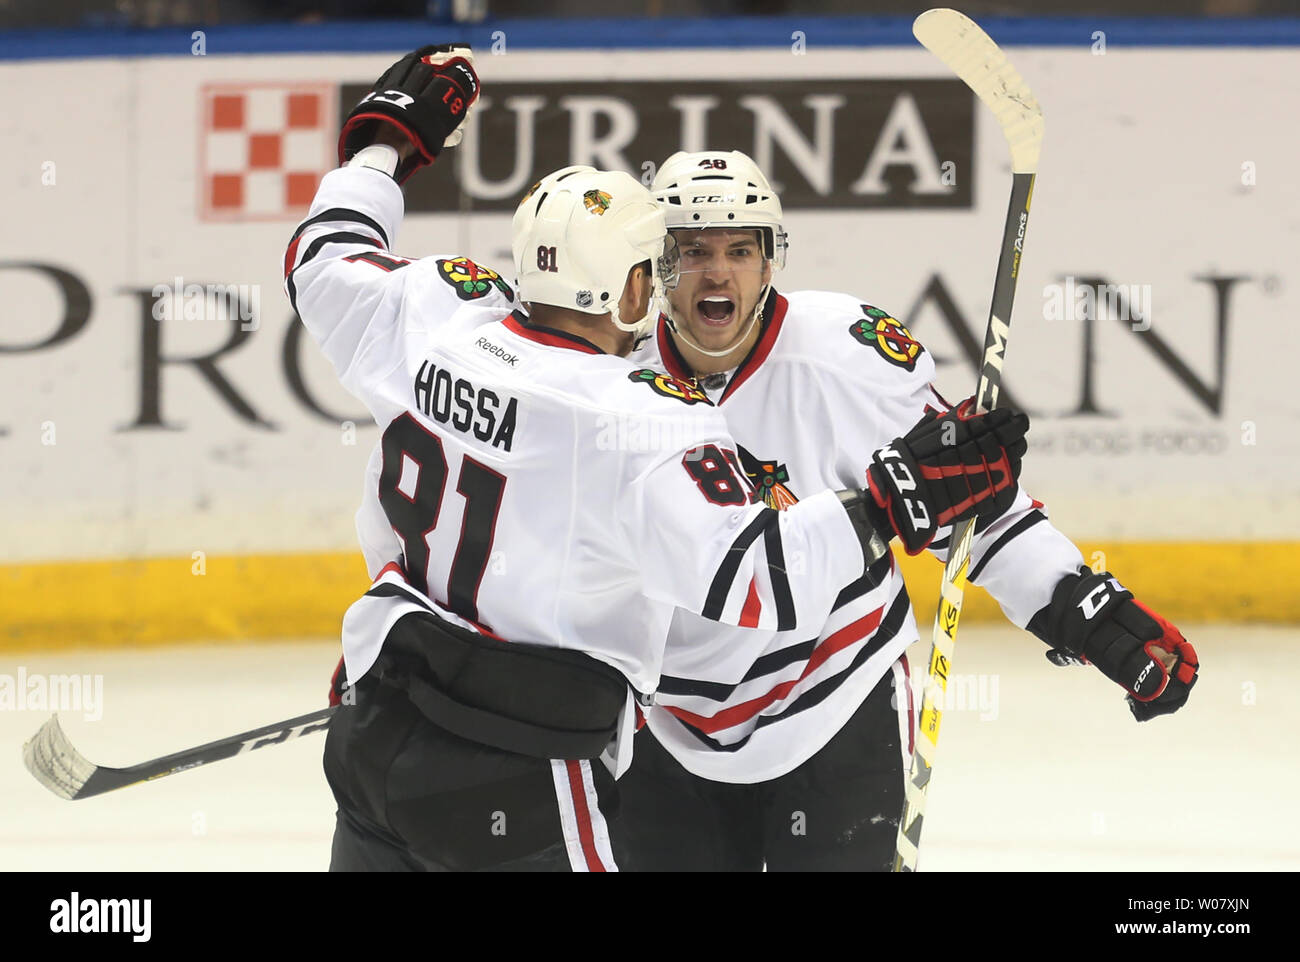 Chicago Blackhawks Vinnie Hinostroza is congratulated by teammate Marian Hossa after scoring what proved to be the winning goal against the St. Louis Blues in the third period at the Scottrade Center in St. Louis on December 17, 2016. Chicago defeated St. Louis 6-4. Photo by Bill Greenblatt/UPI Stock Photo